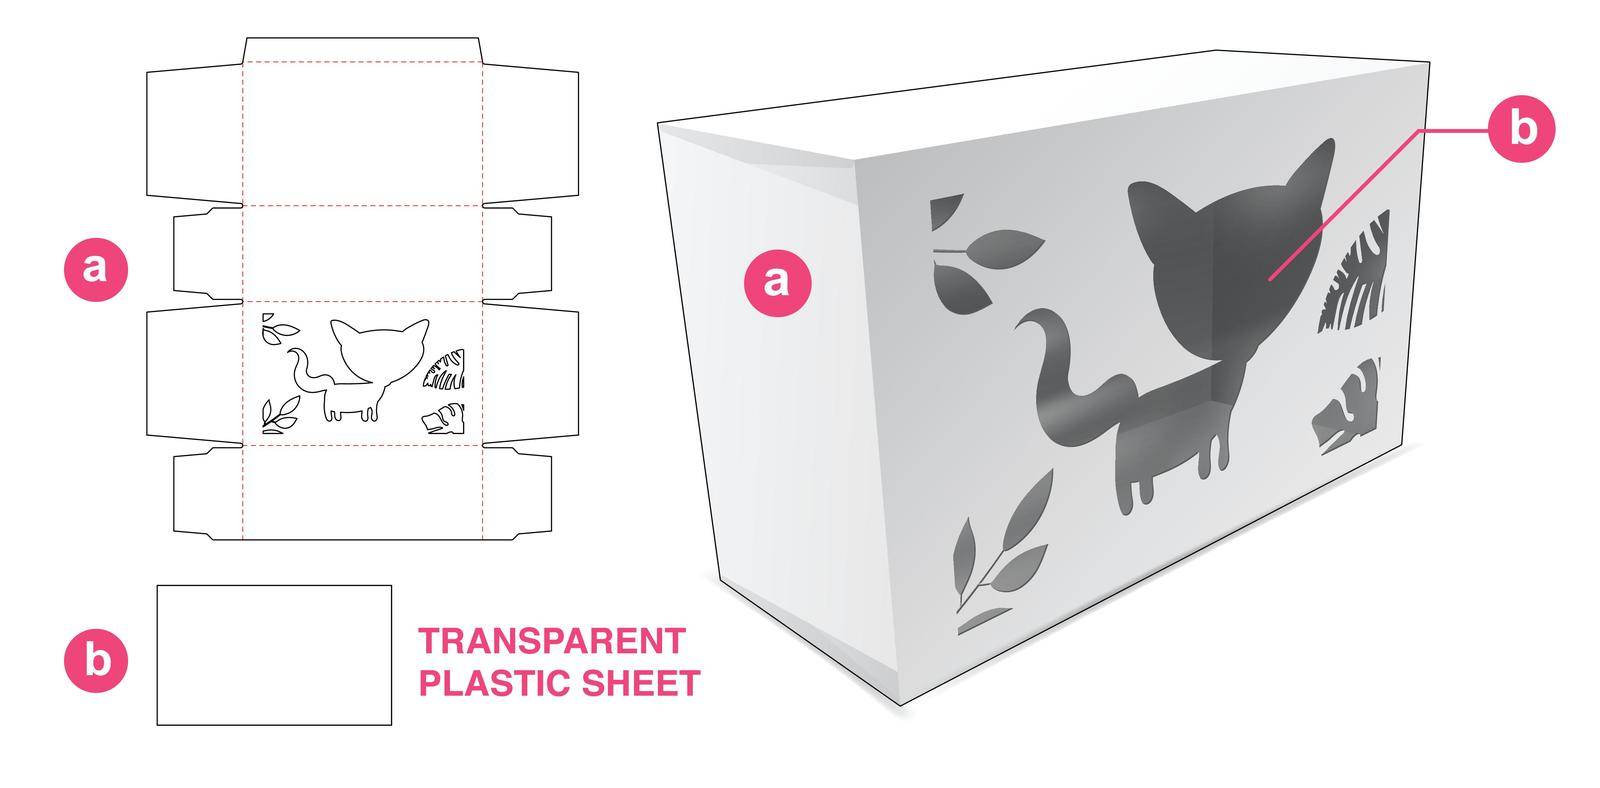 Cardboard packaging with fox in jungle window and transparent plastic sheet die cut template by valueinvestor